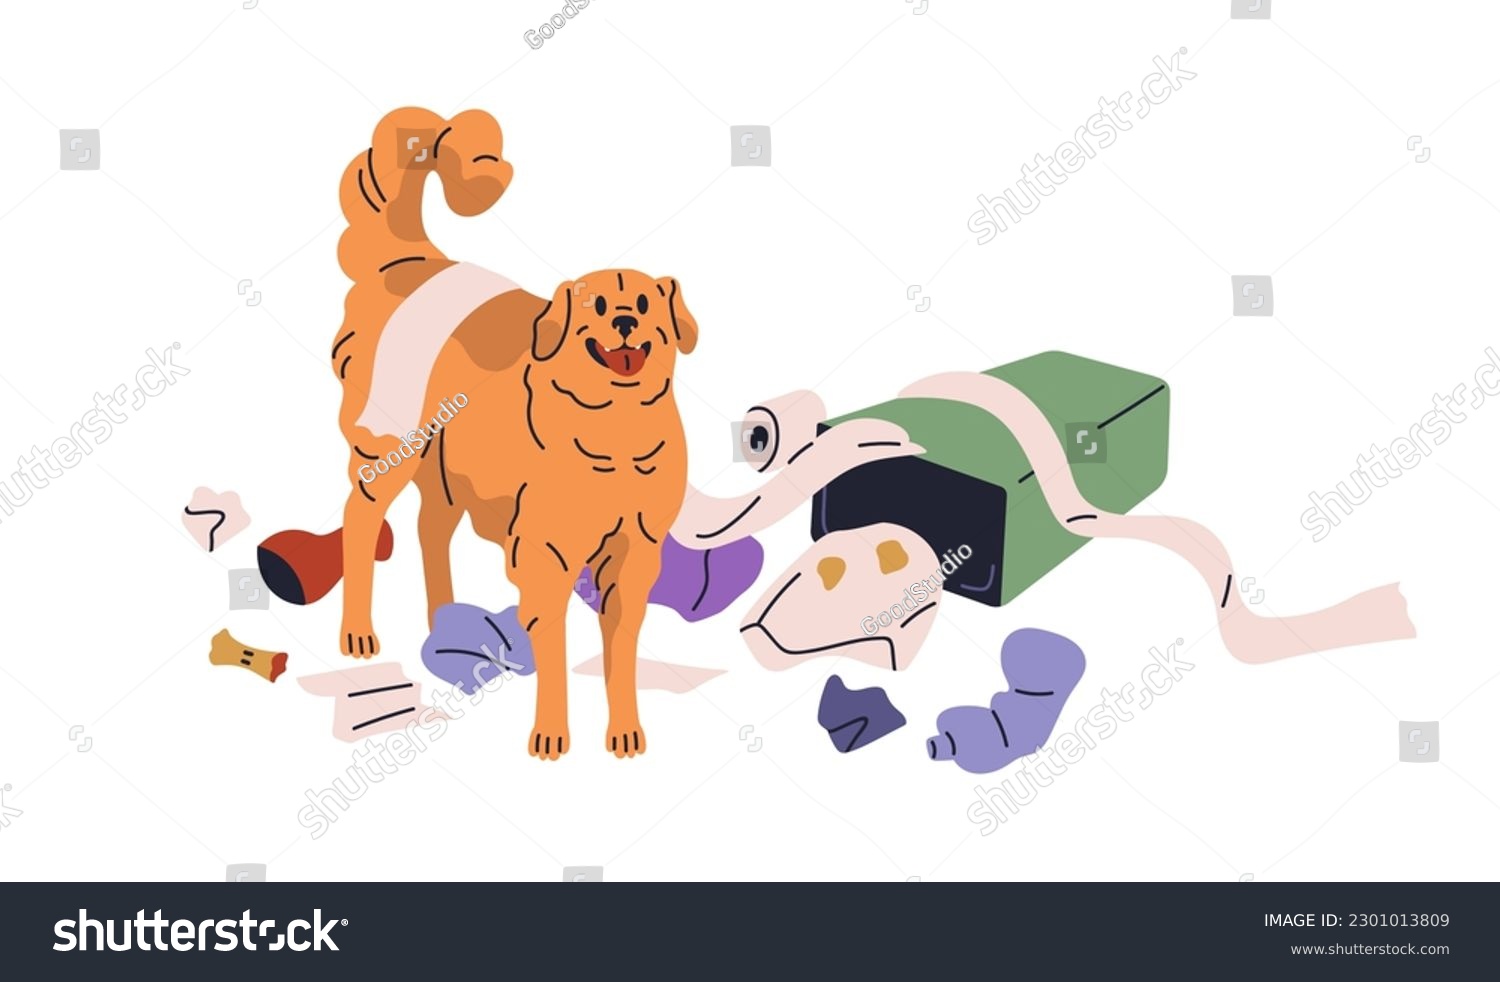 SVG of Dog in mess and chaos among garbage, trash. Naughty mischievous doggy. Bad unwanted inappropriate canine animal behavior, quirk. Flat vector illustration isolated on white background svg